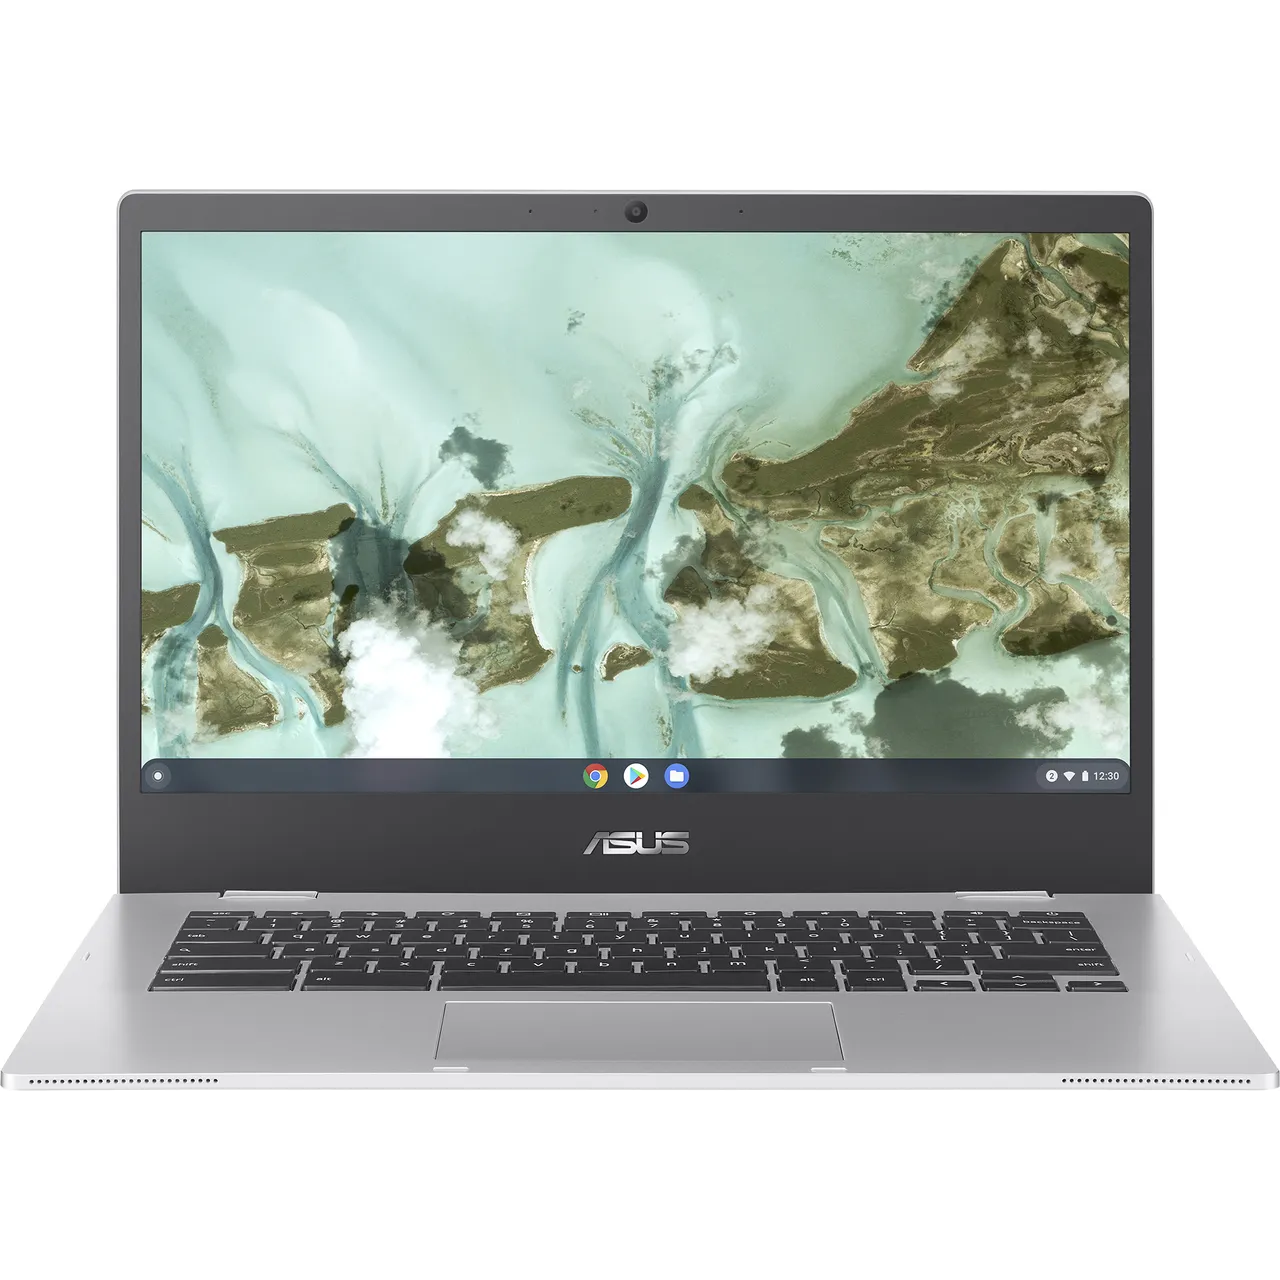 Asus Chromebook CX1 14" Full HD Intel Celeron N 4GB/64GB Laptop - Silver | CX1400CMA-EB0130 from Asus - DID Electrical